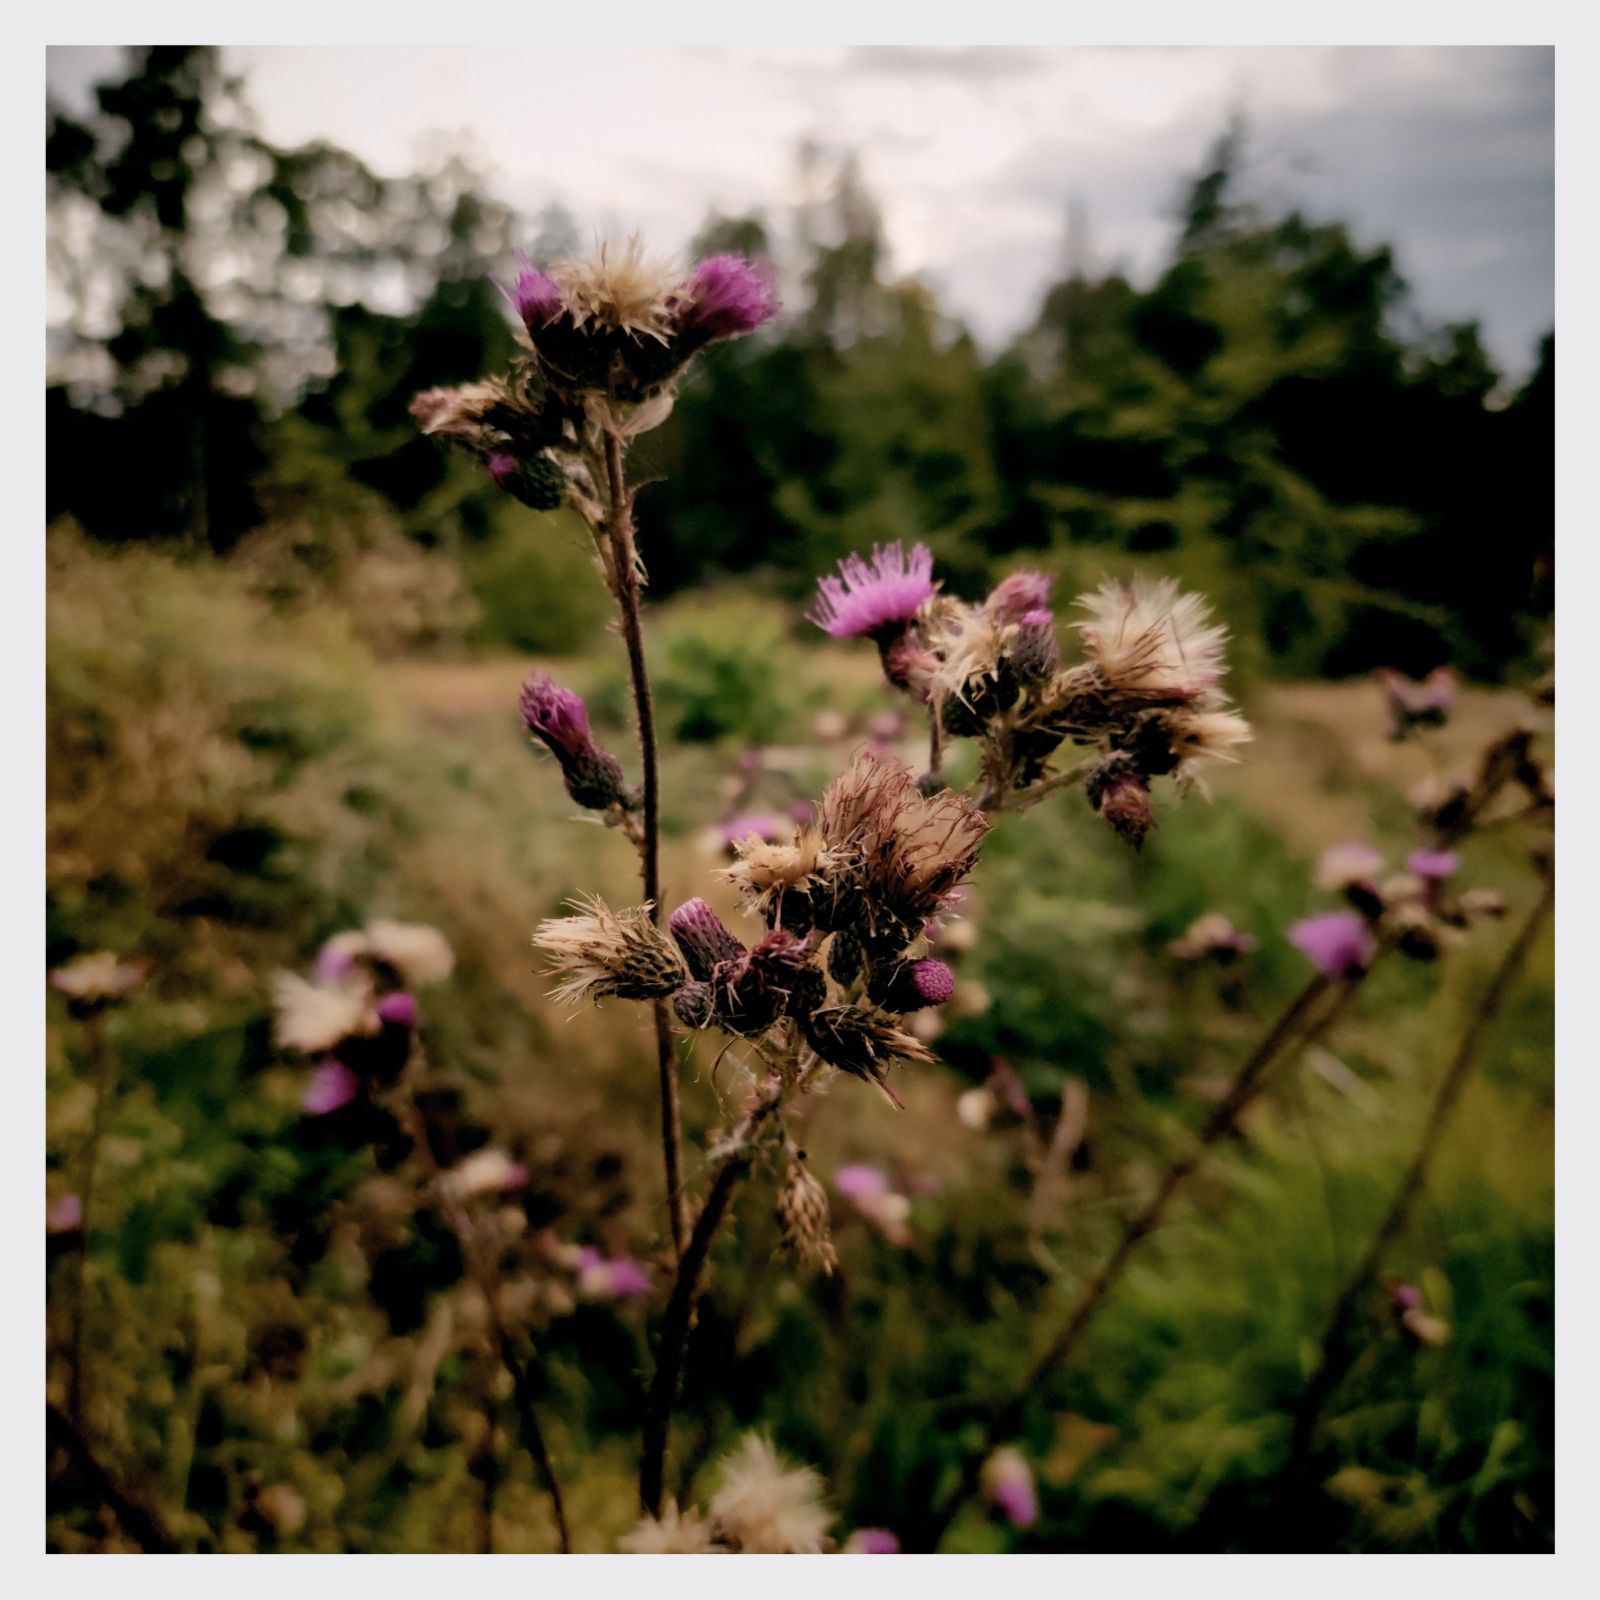 Thistles between a meadow and a forest.